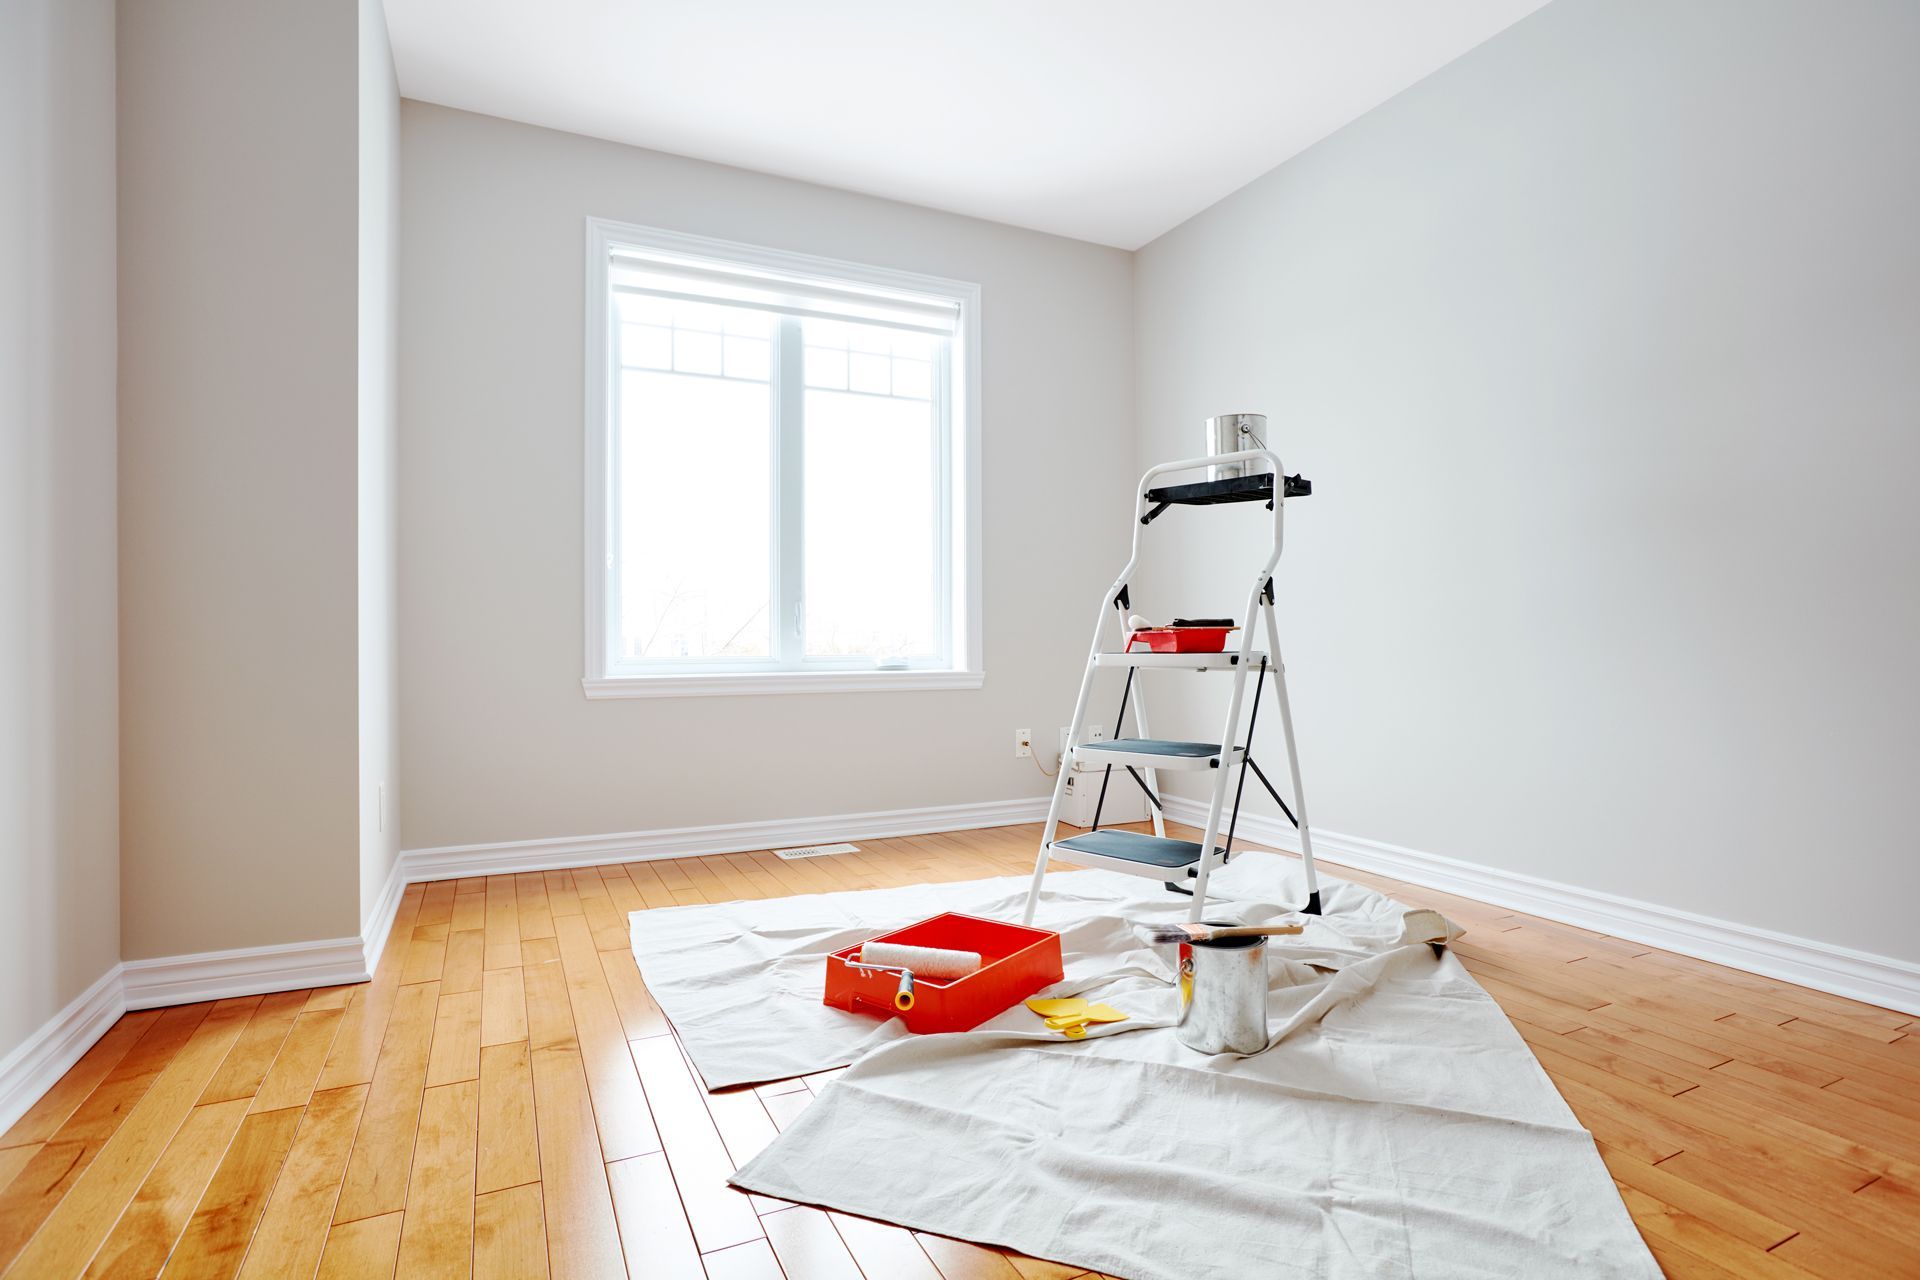 An Empty Room With a Ladder and Paint Supplies on the Floor